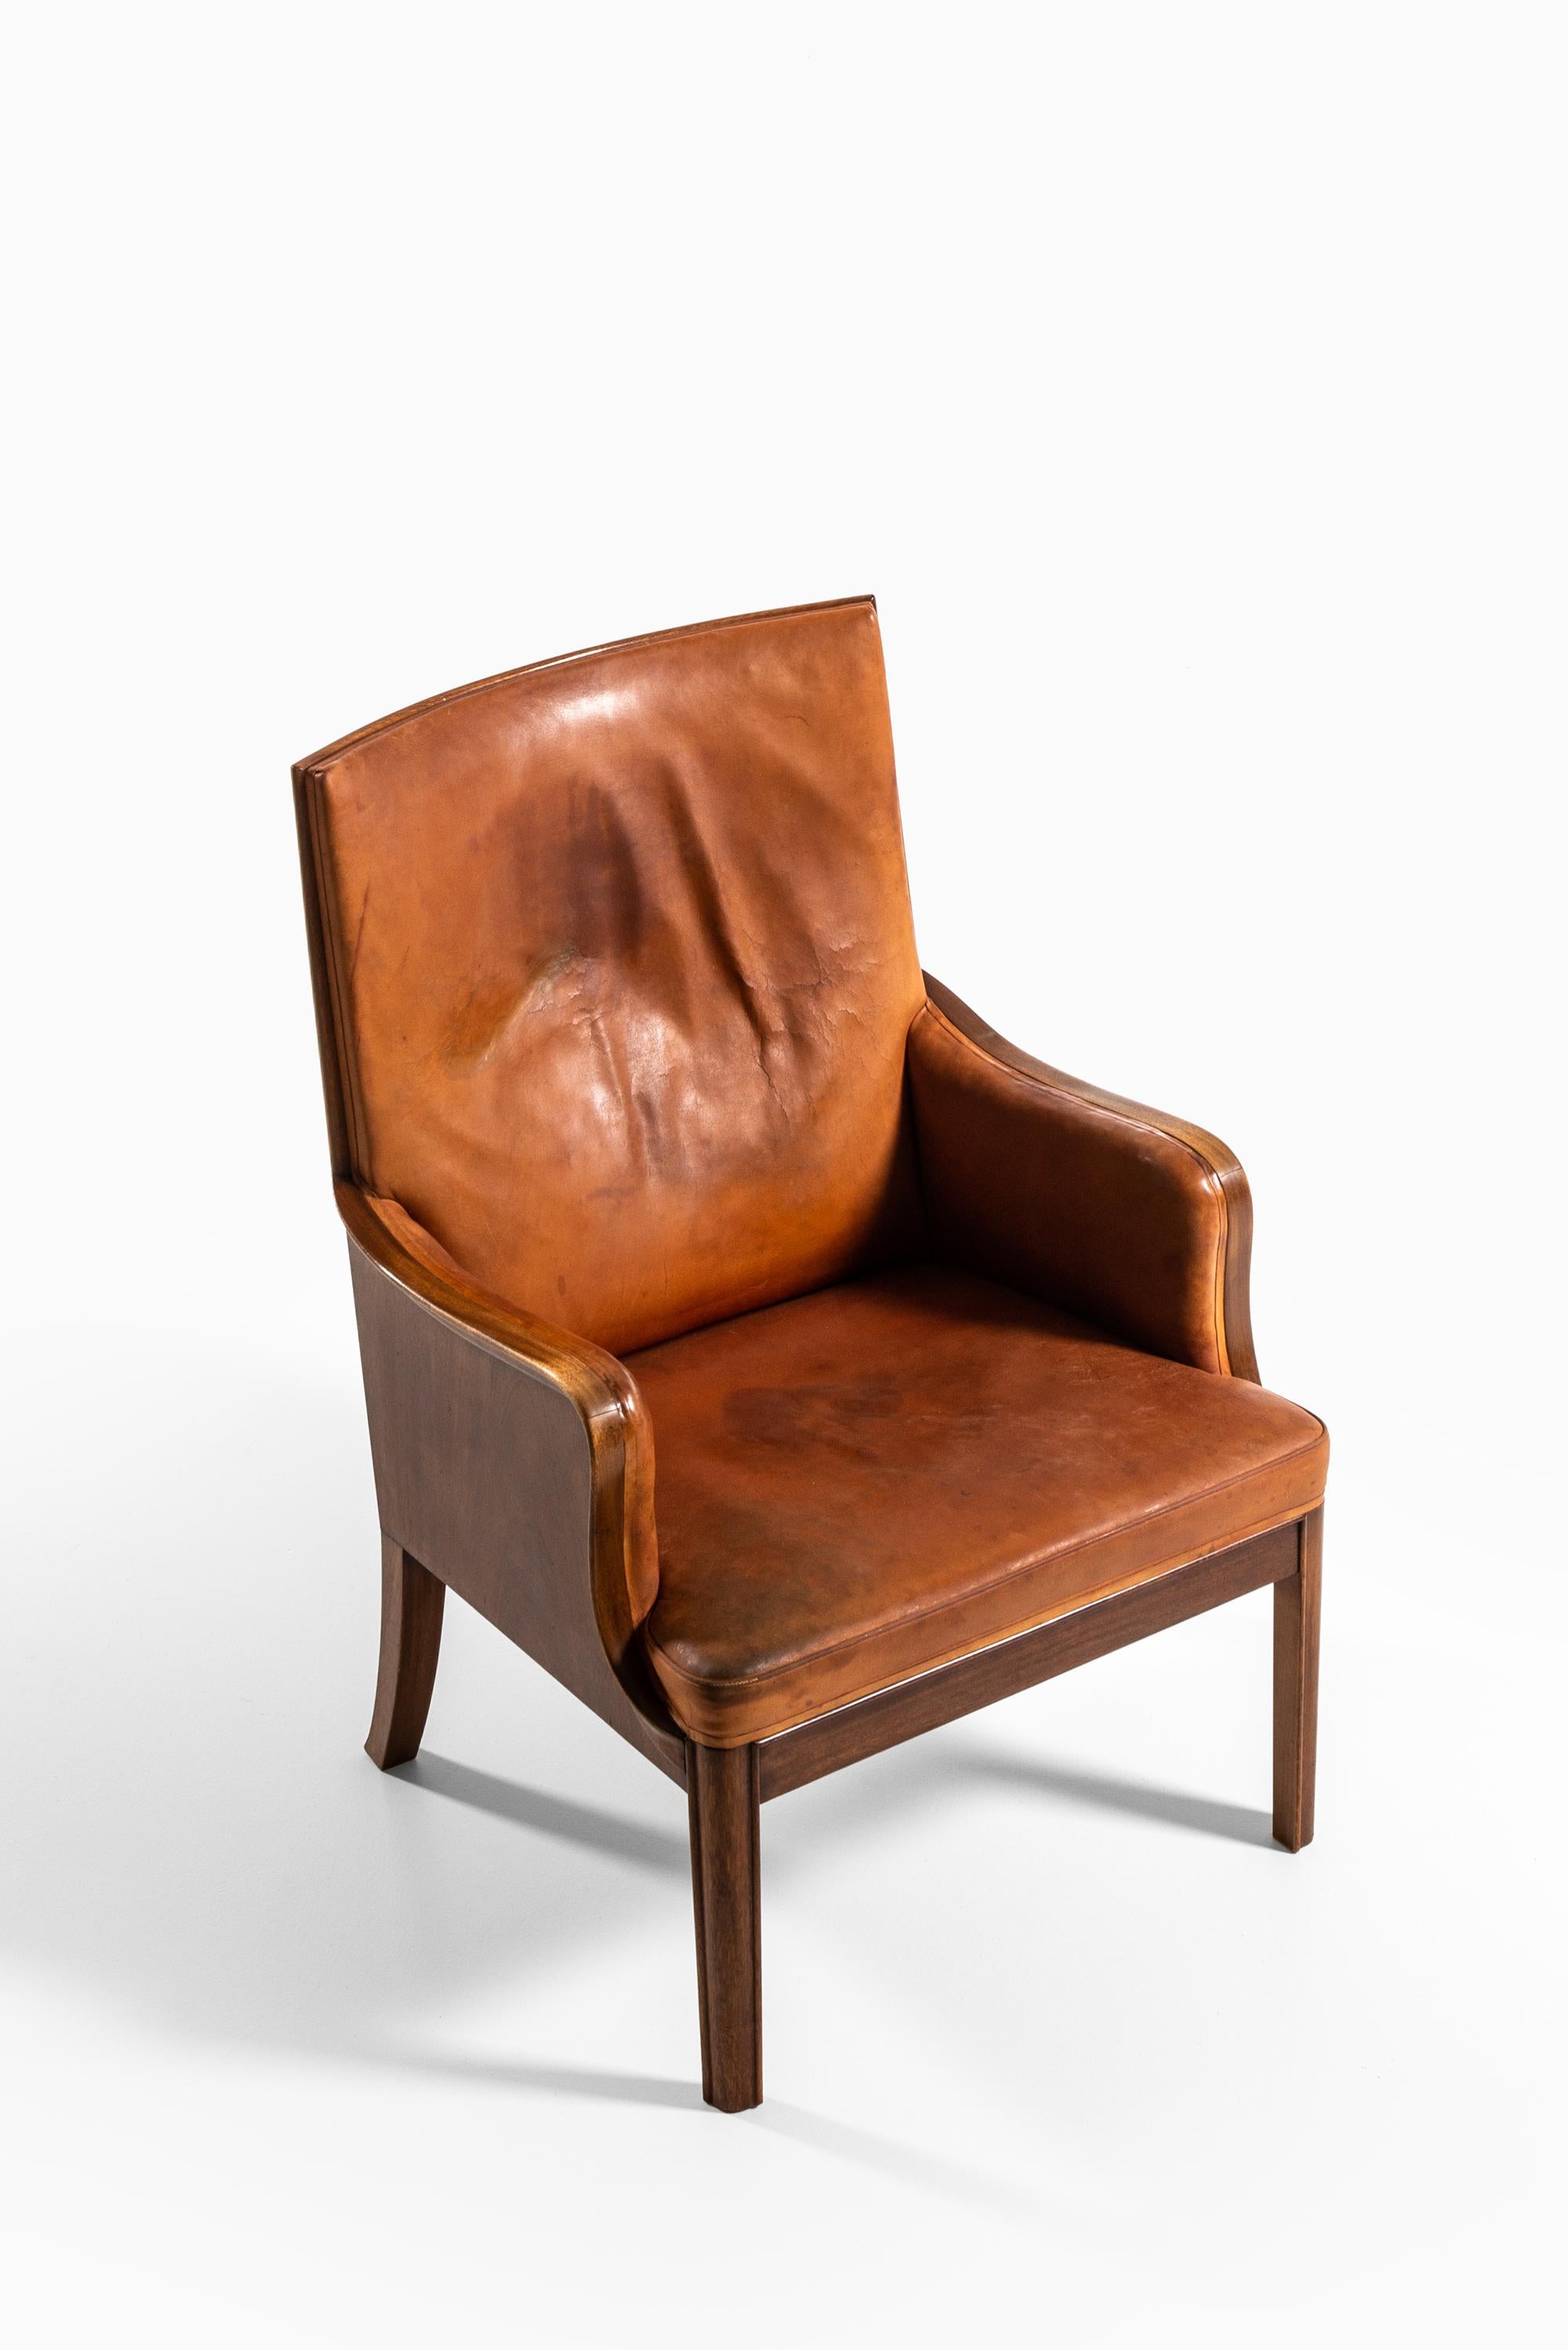 Leather Frits Henningsen Easy Chair Produced by Cabinetmaker Frits Henningsen in Denmark For Sale